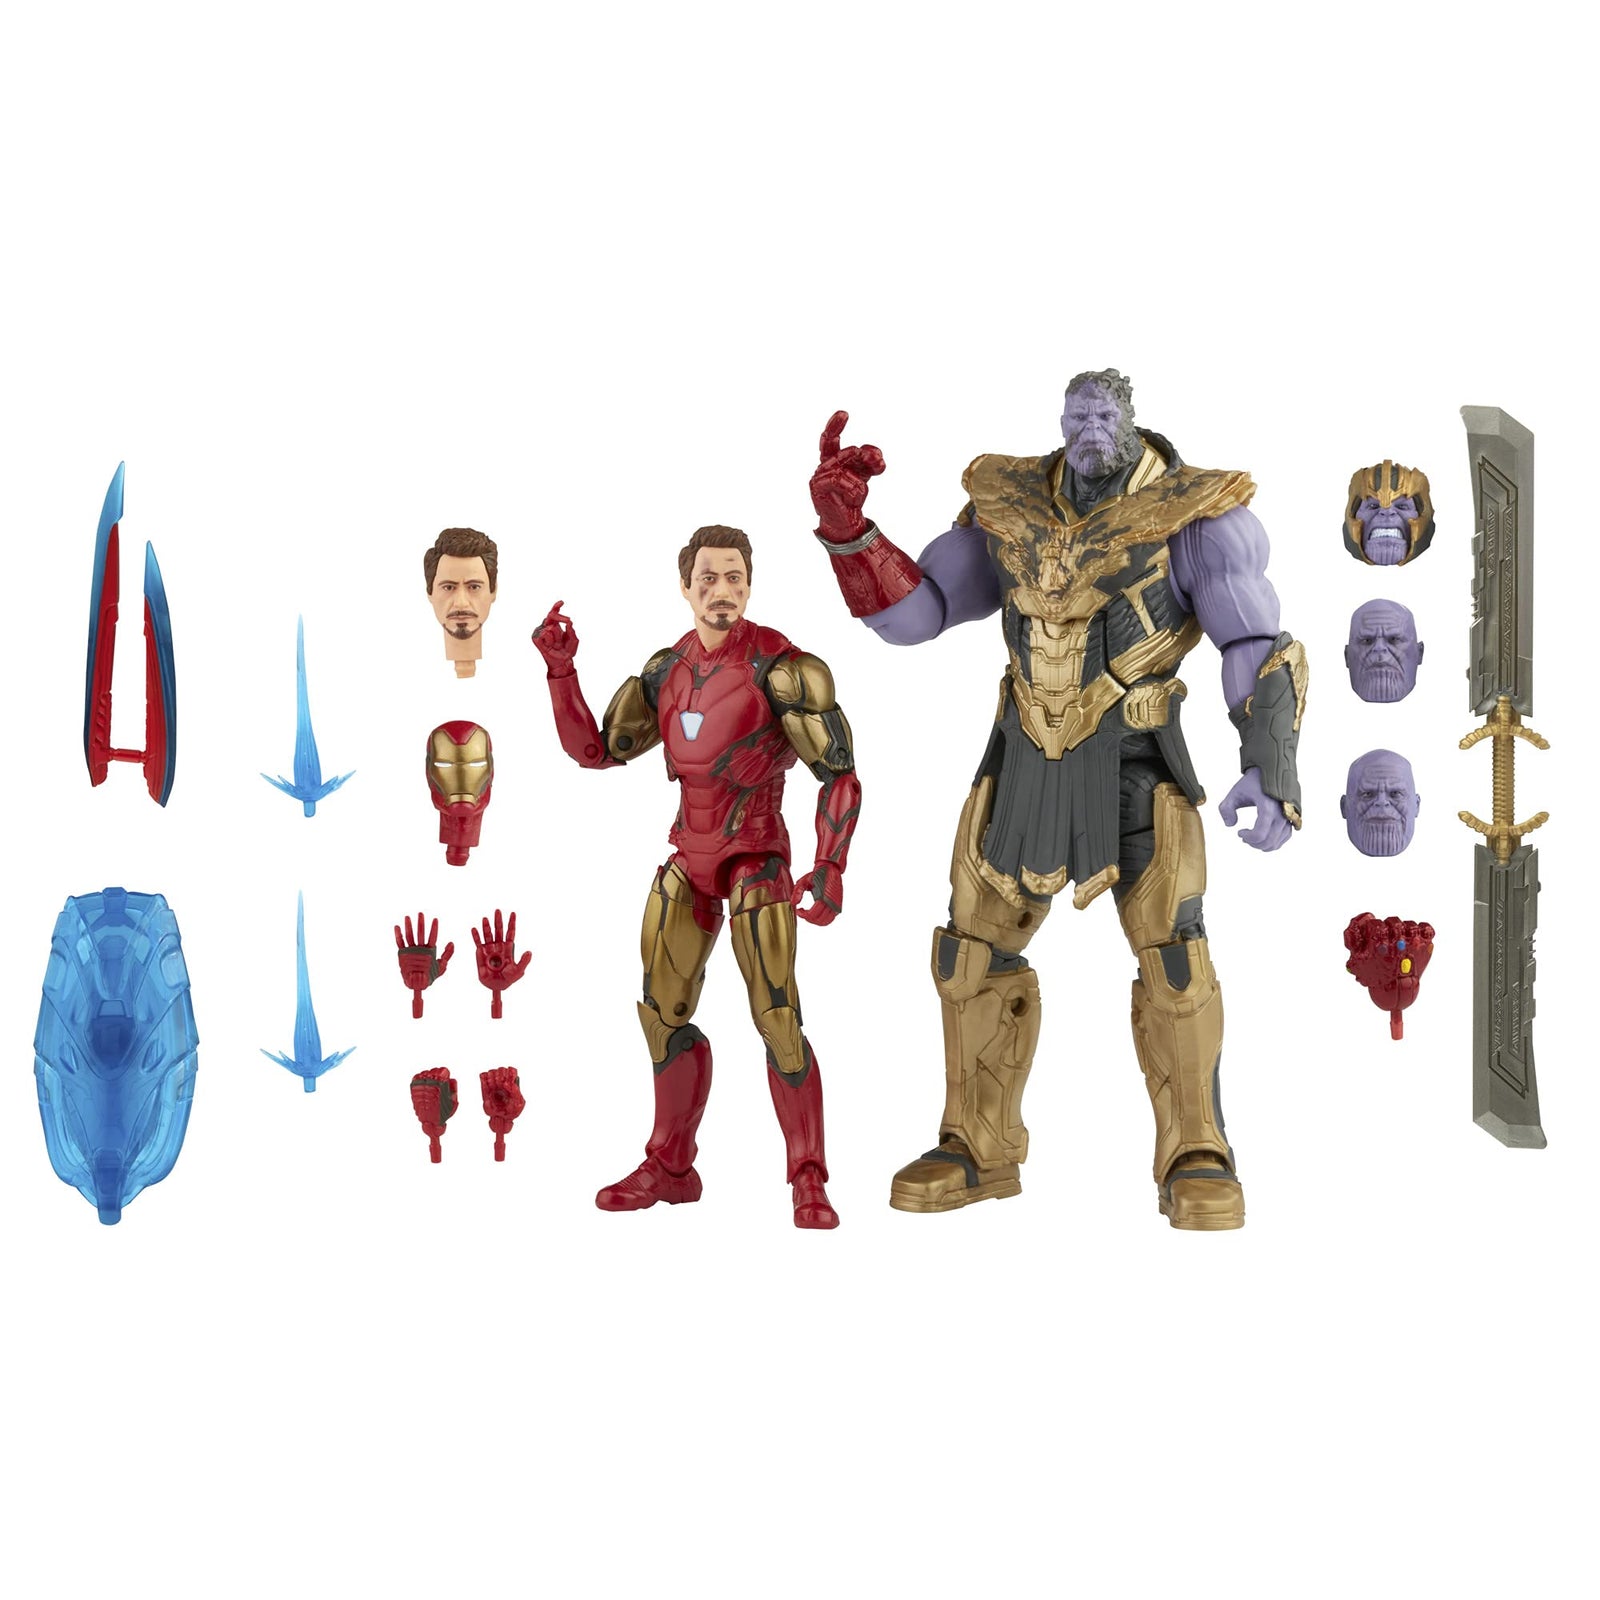 Marvel Hasbro Legends Series 6-inch Scale Action Figure 2-Pack Toy Iron Man Mark 85 vs. Thanos, Infinity Saga Character, Premium Design, 2 Figures and 8 Accessories